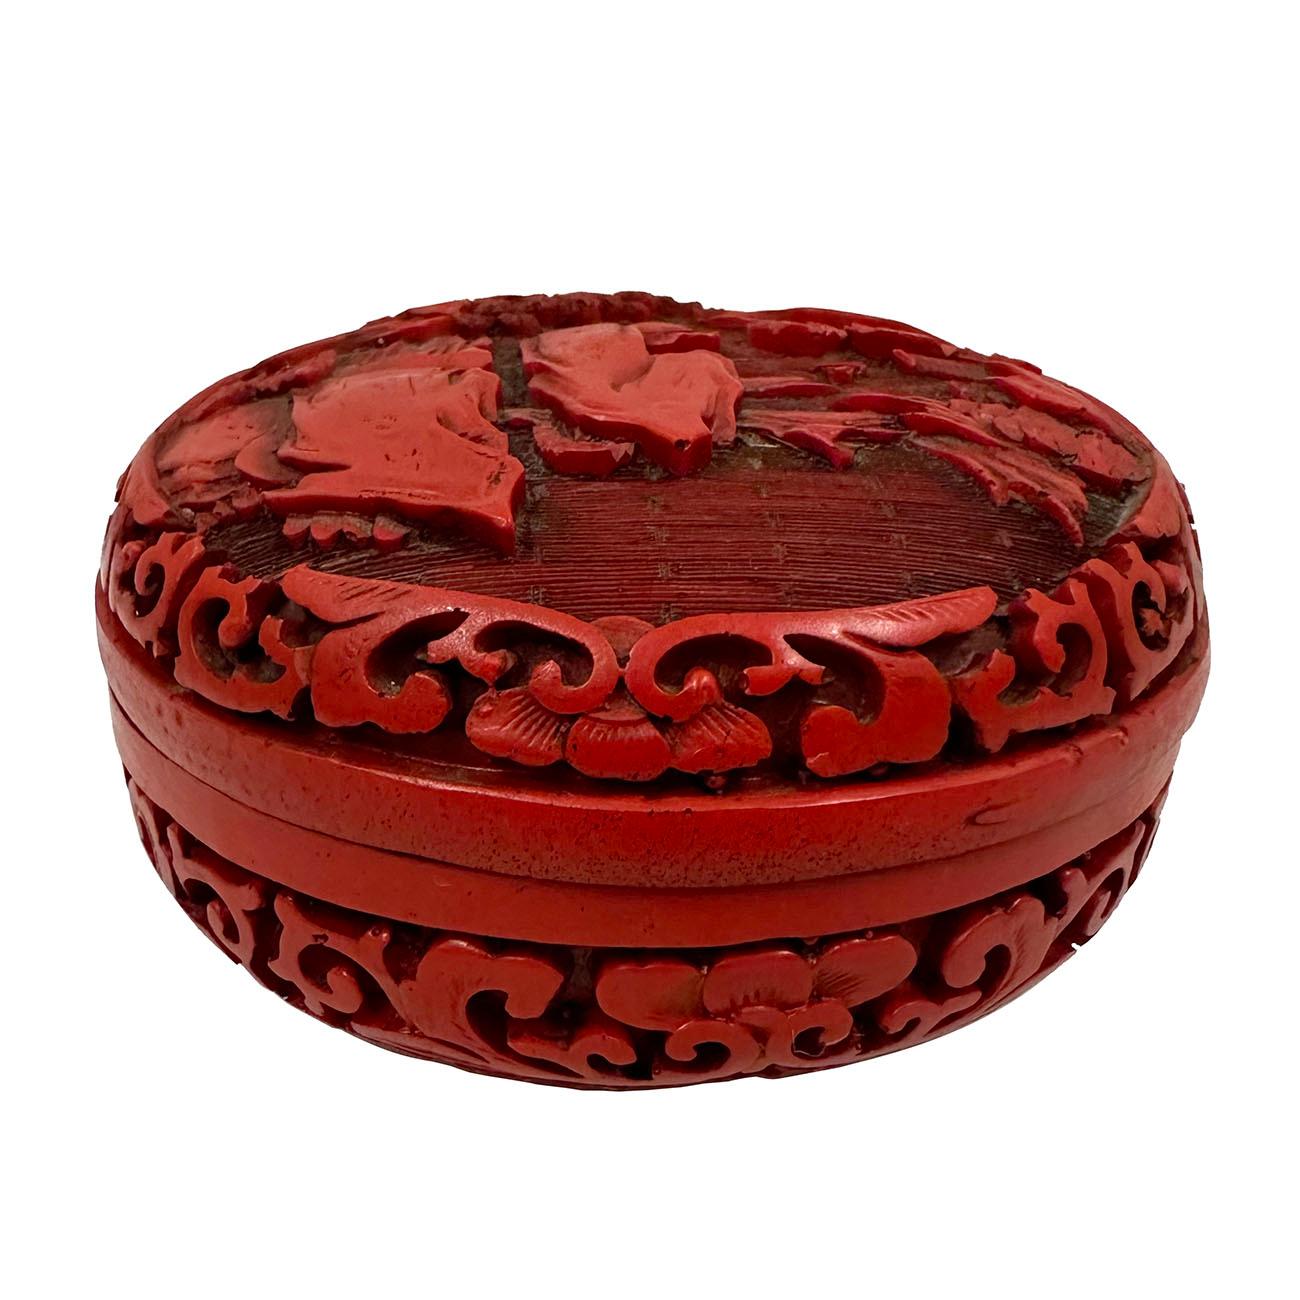 An early 20th Century Chinese cinnabar circular box. This is a marvelous piece with very fine details on the top panel/lid of the box. The top panel is beautifully hand-carved and hand-lacquered with a beautiful scene of mountains and pine trees,